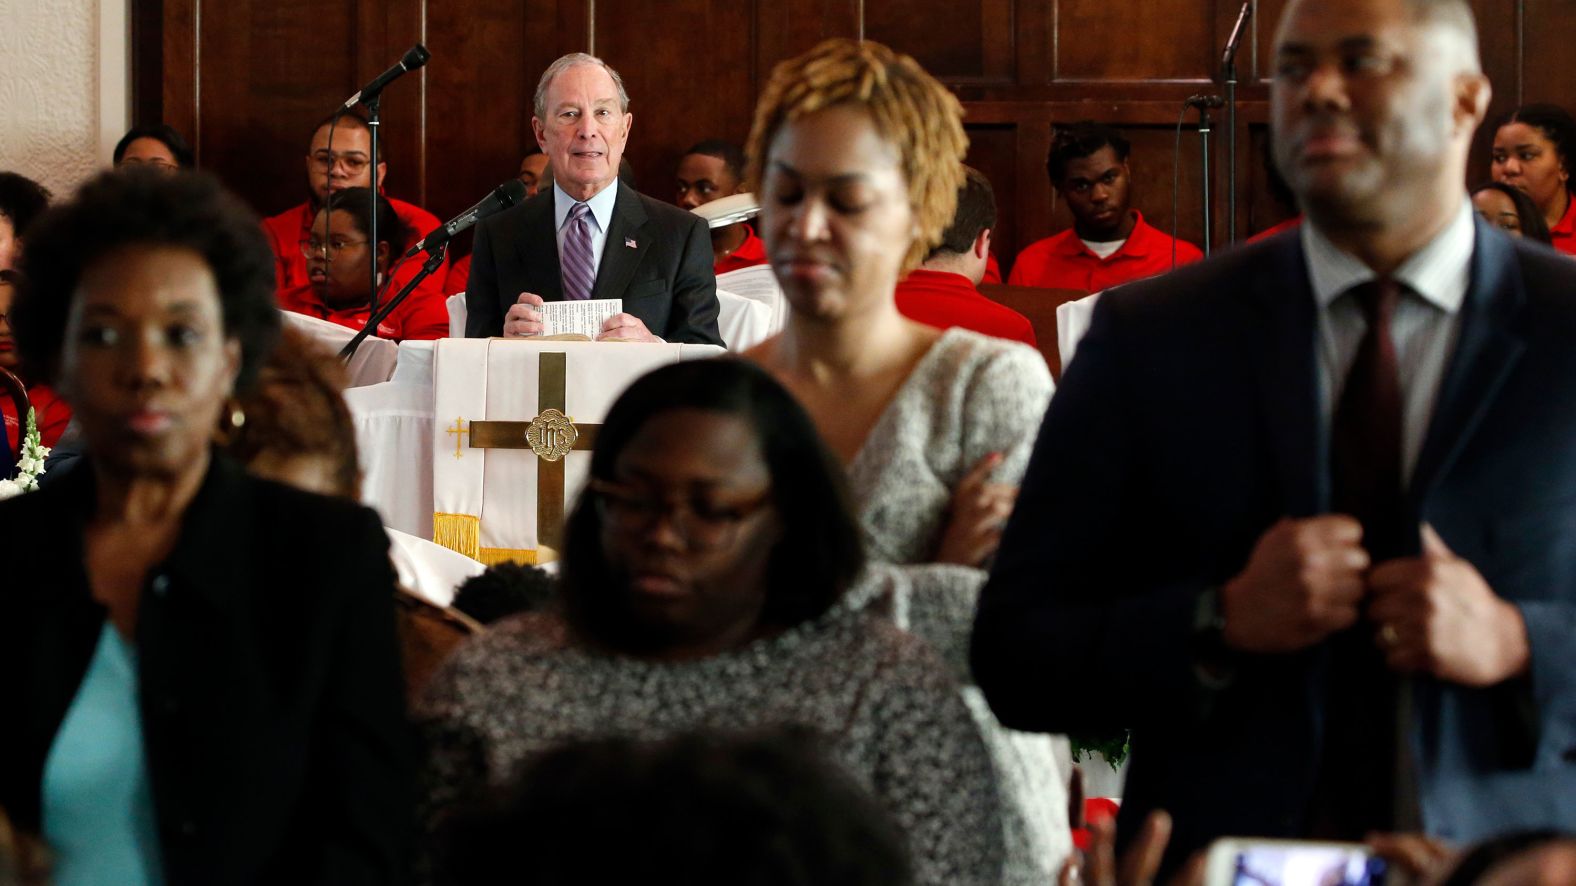 Church congregants in Selma, Alabama, protest Bloomberg by <a href="index.php?page=&url=https%3A%2F%2Fwww.cnn.com%2F2020%2F03%2F01%2Fpolitics%2Fmichael-bloomberg-selma-church%2Findex.html" target="_blank">turning their backs to him</a> during a speech on Sunday.